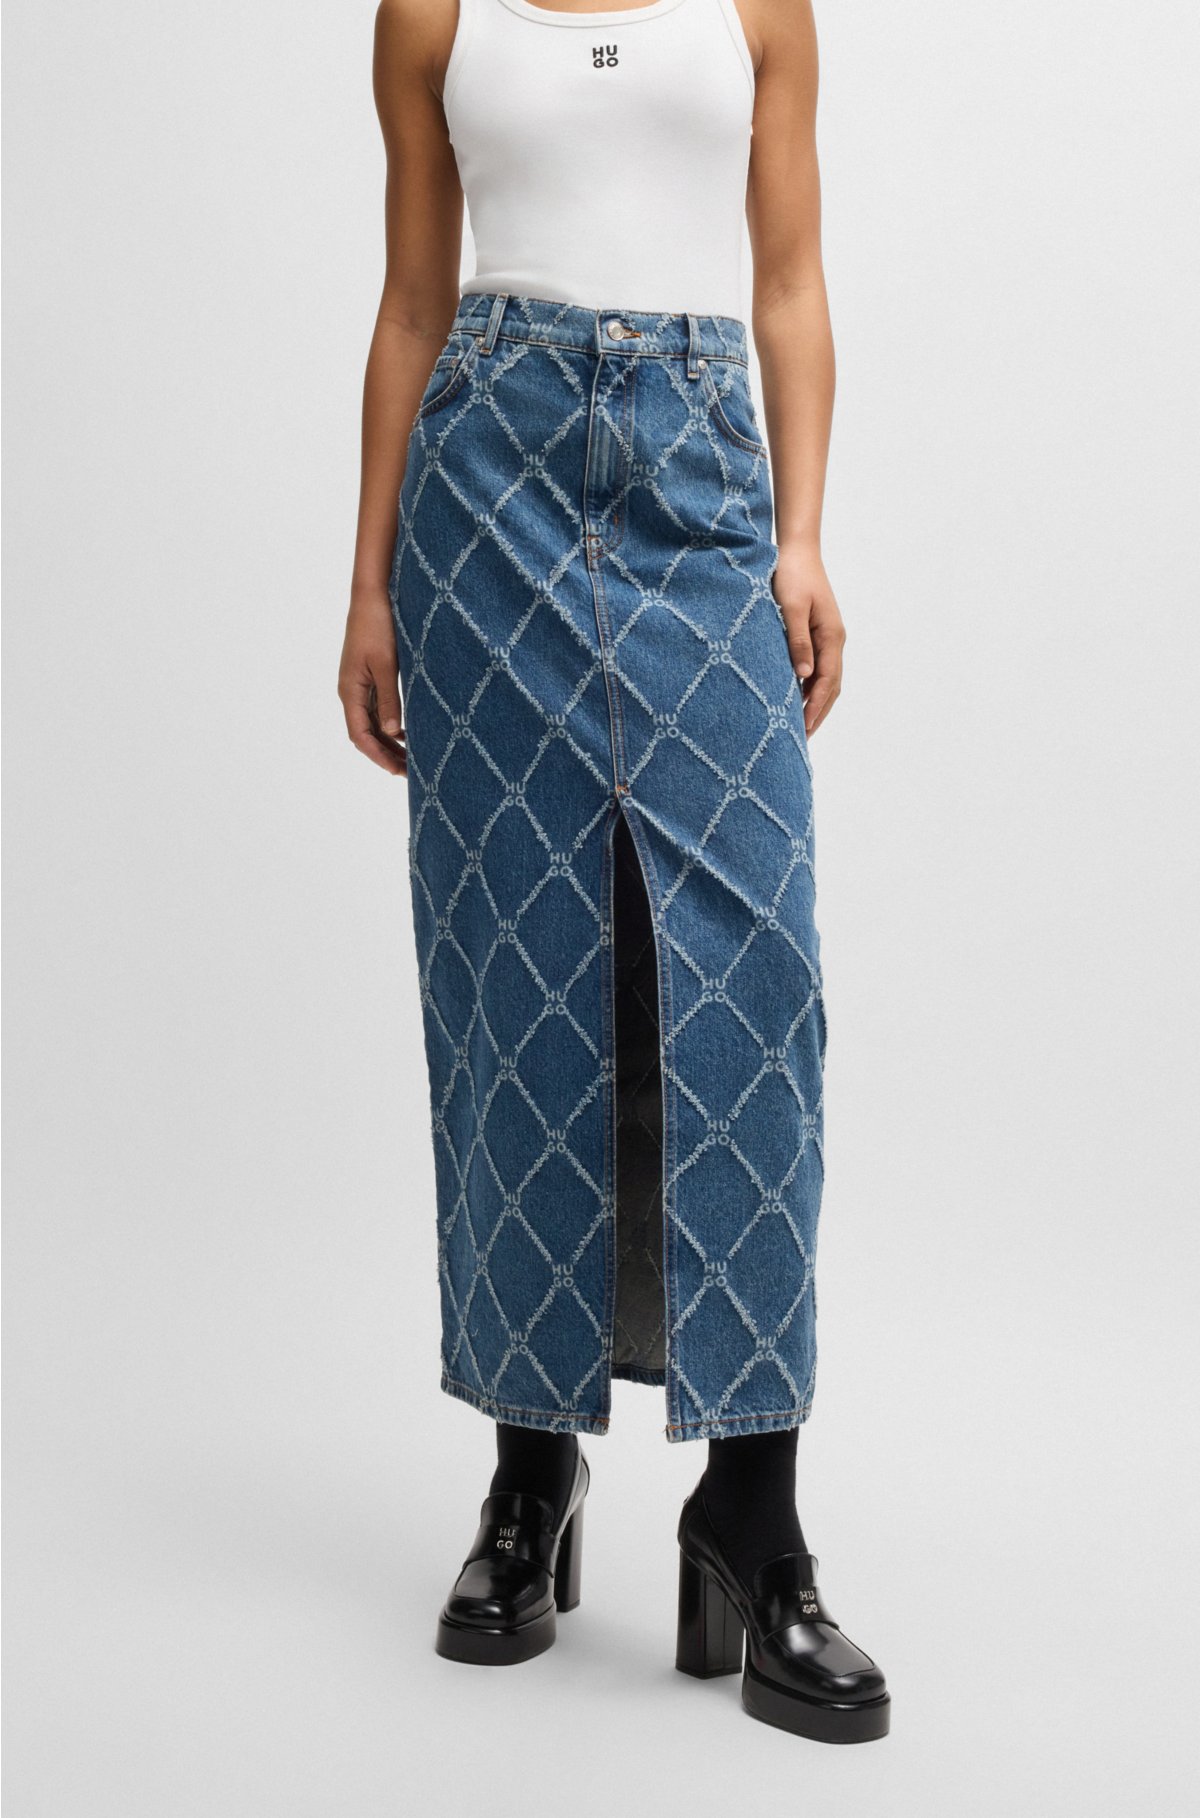 Rigid-denim maxi skirt with stacked-logo pattern, Blue Patterned